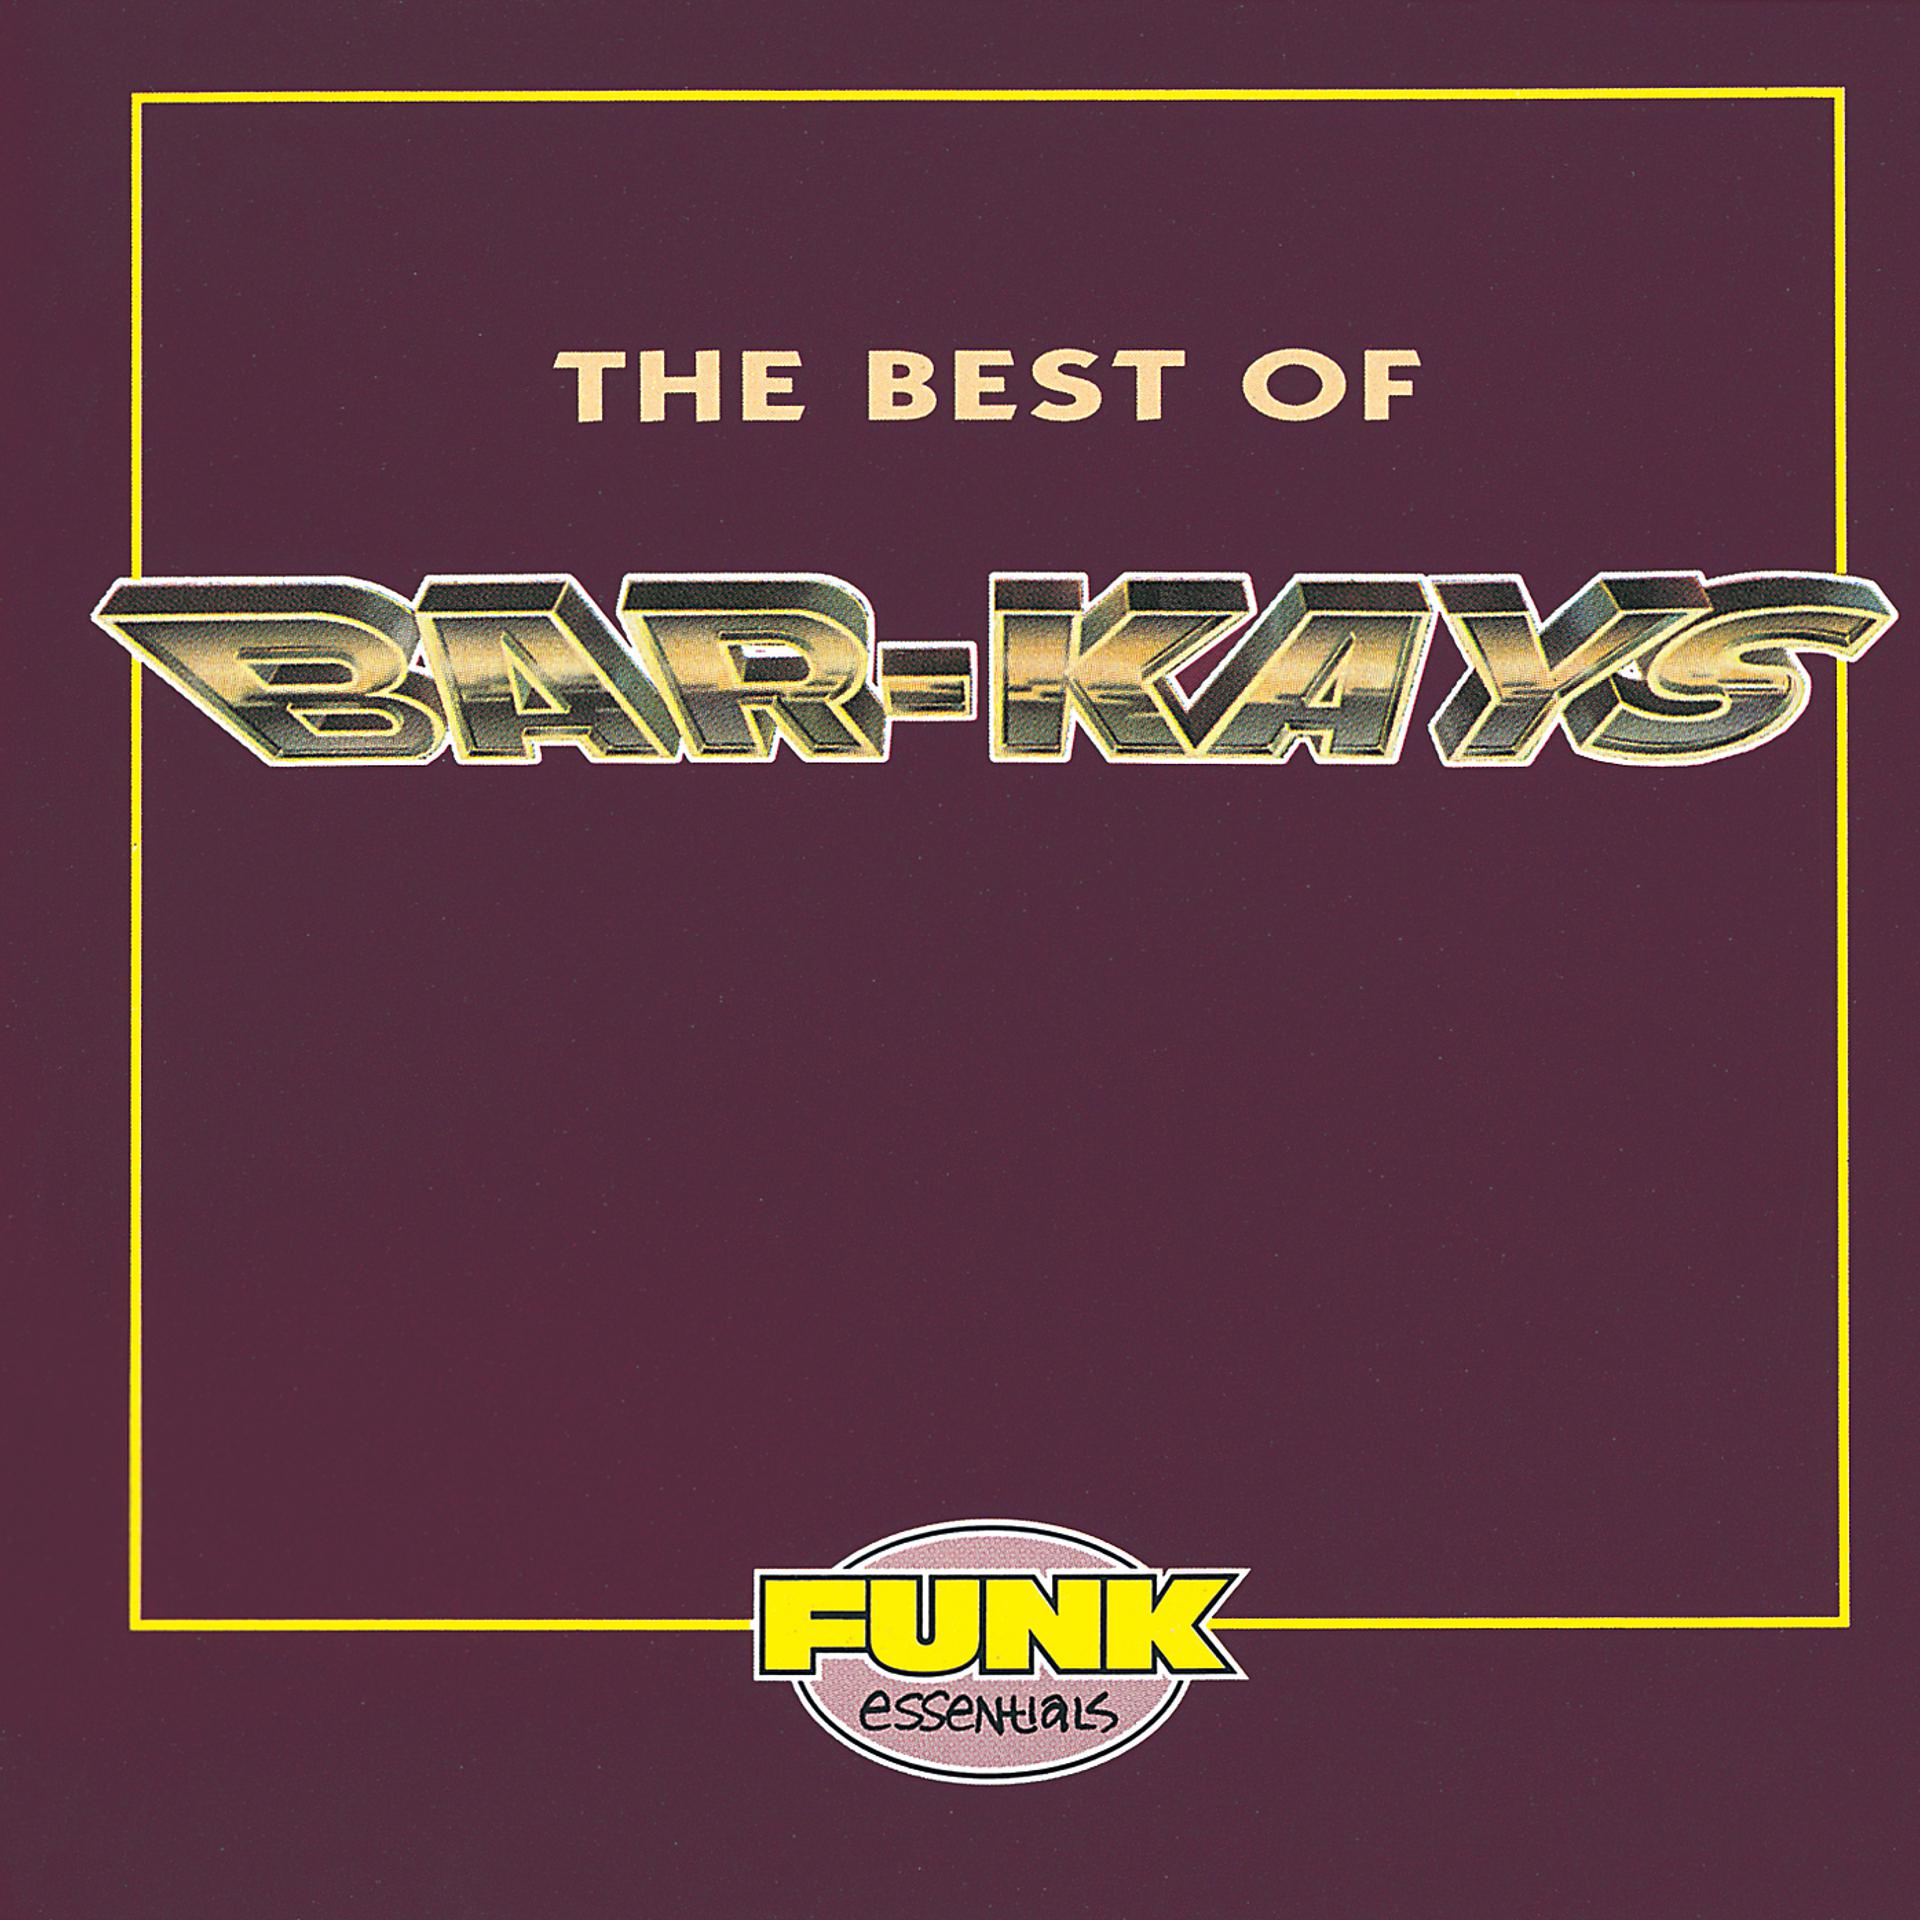 Постер альбома The Best Of The Bar-Kays